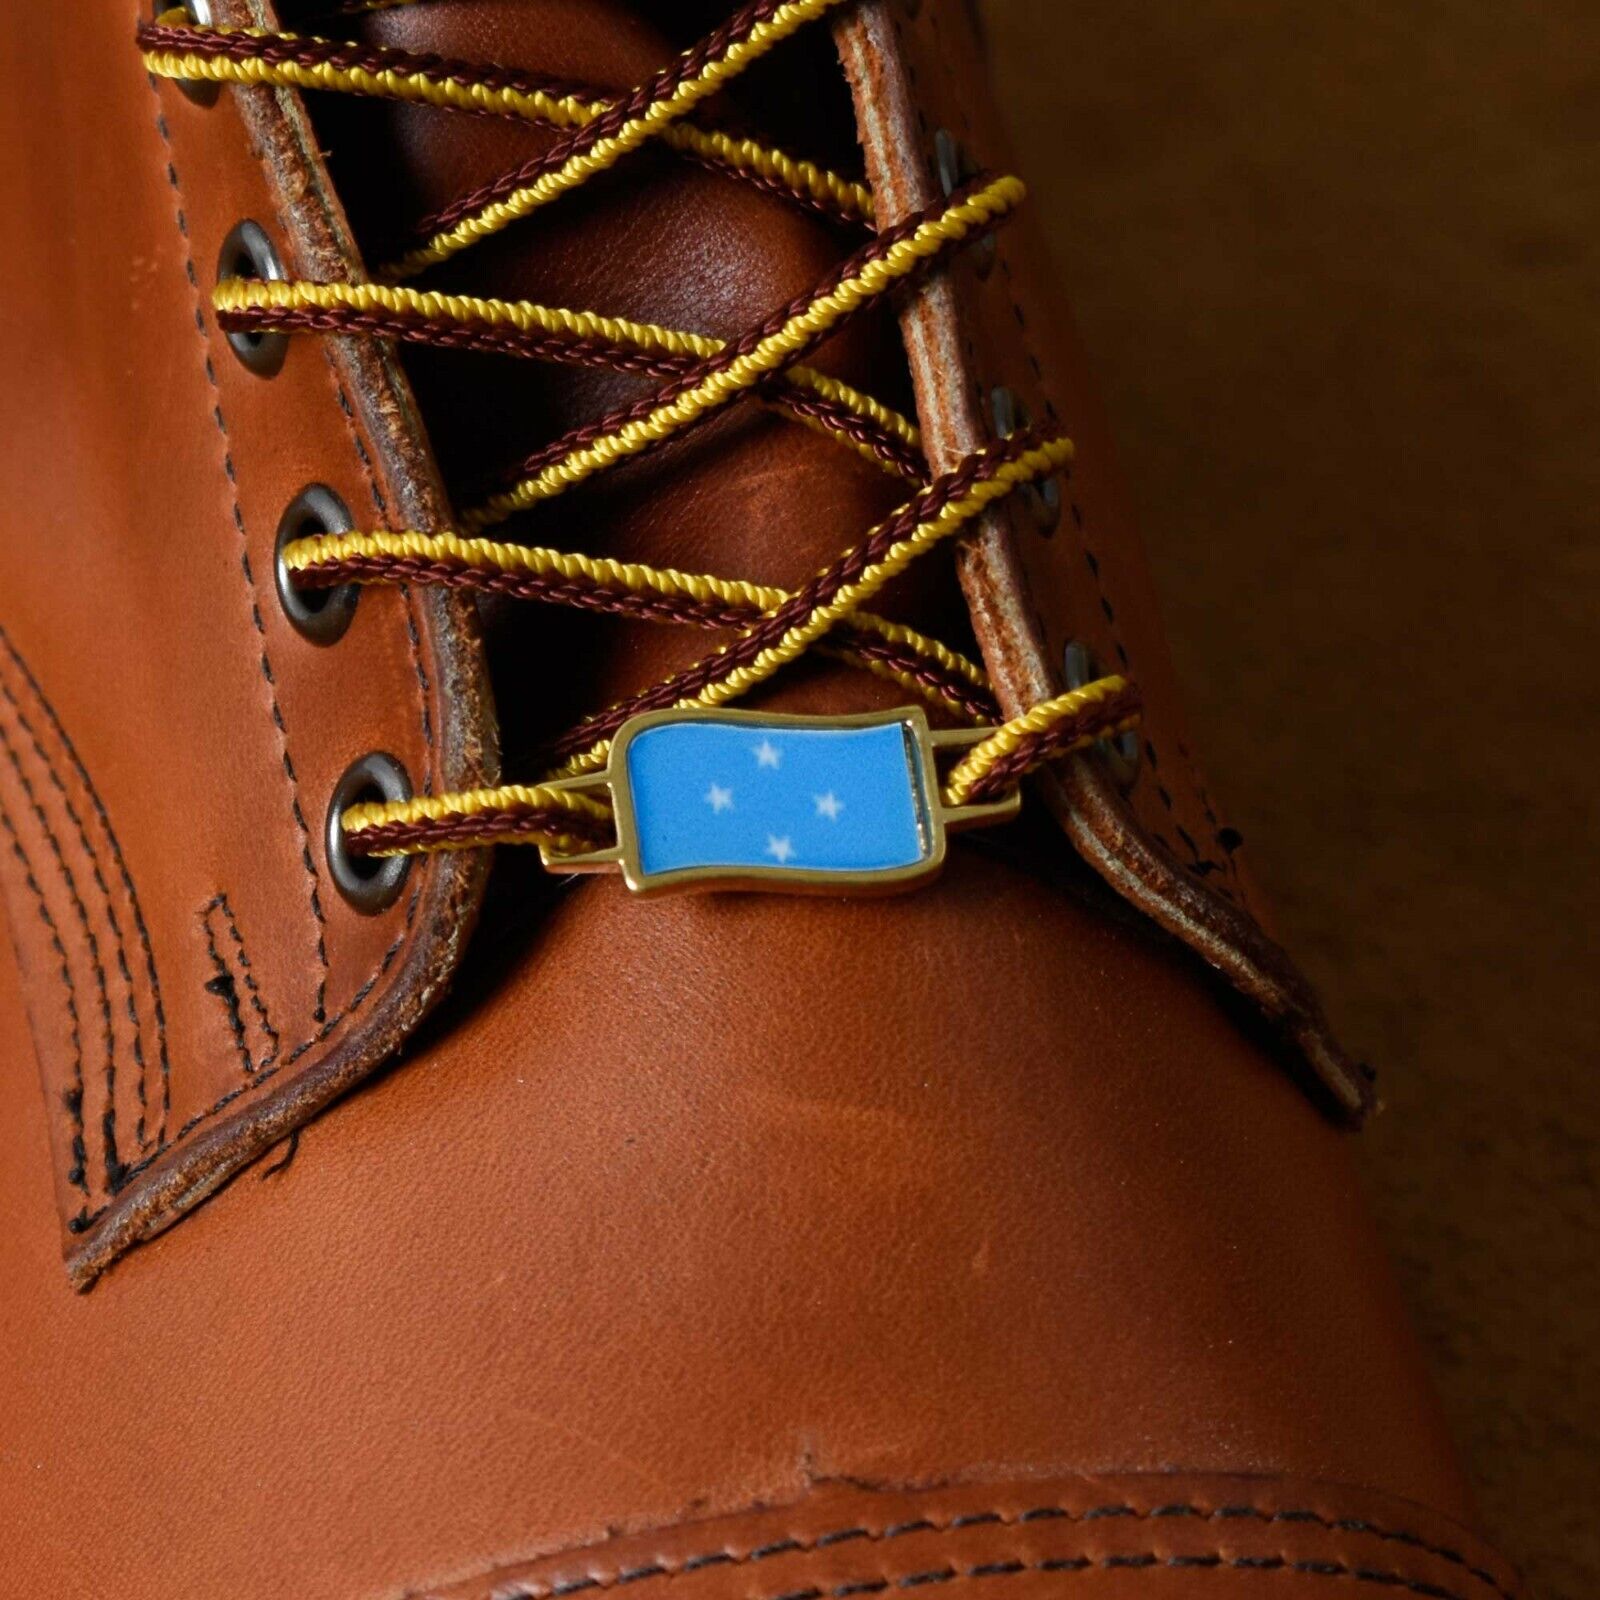 Micronesia Flags Shoes Boot Shoelace Keeper Holder Charm BrooklynMaker